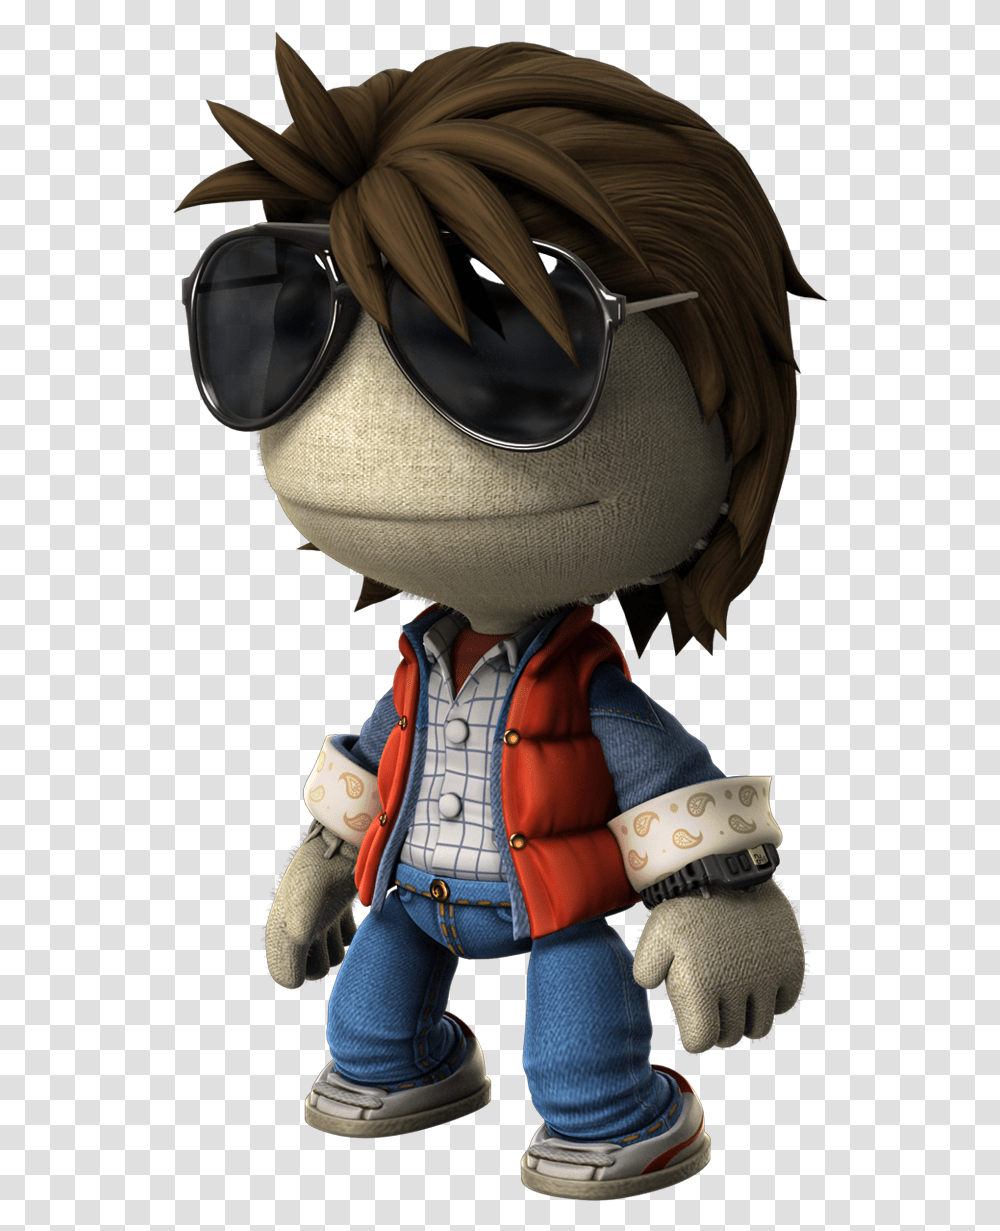 Little Big Planet 3 Marty Mcfly, Doll, Toy, Sunglasses, Accessories Transparent Png